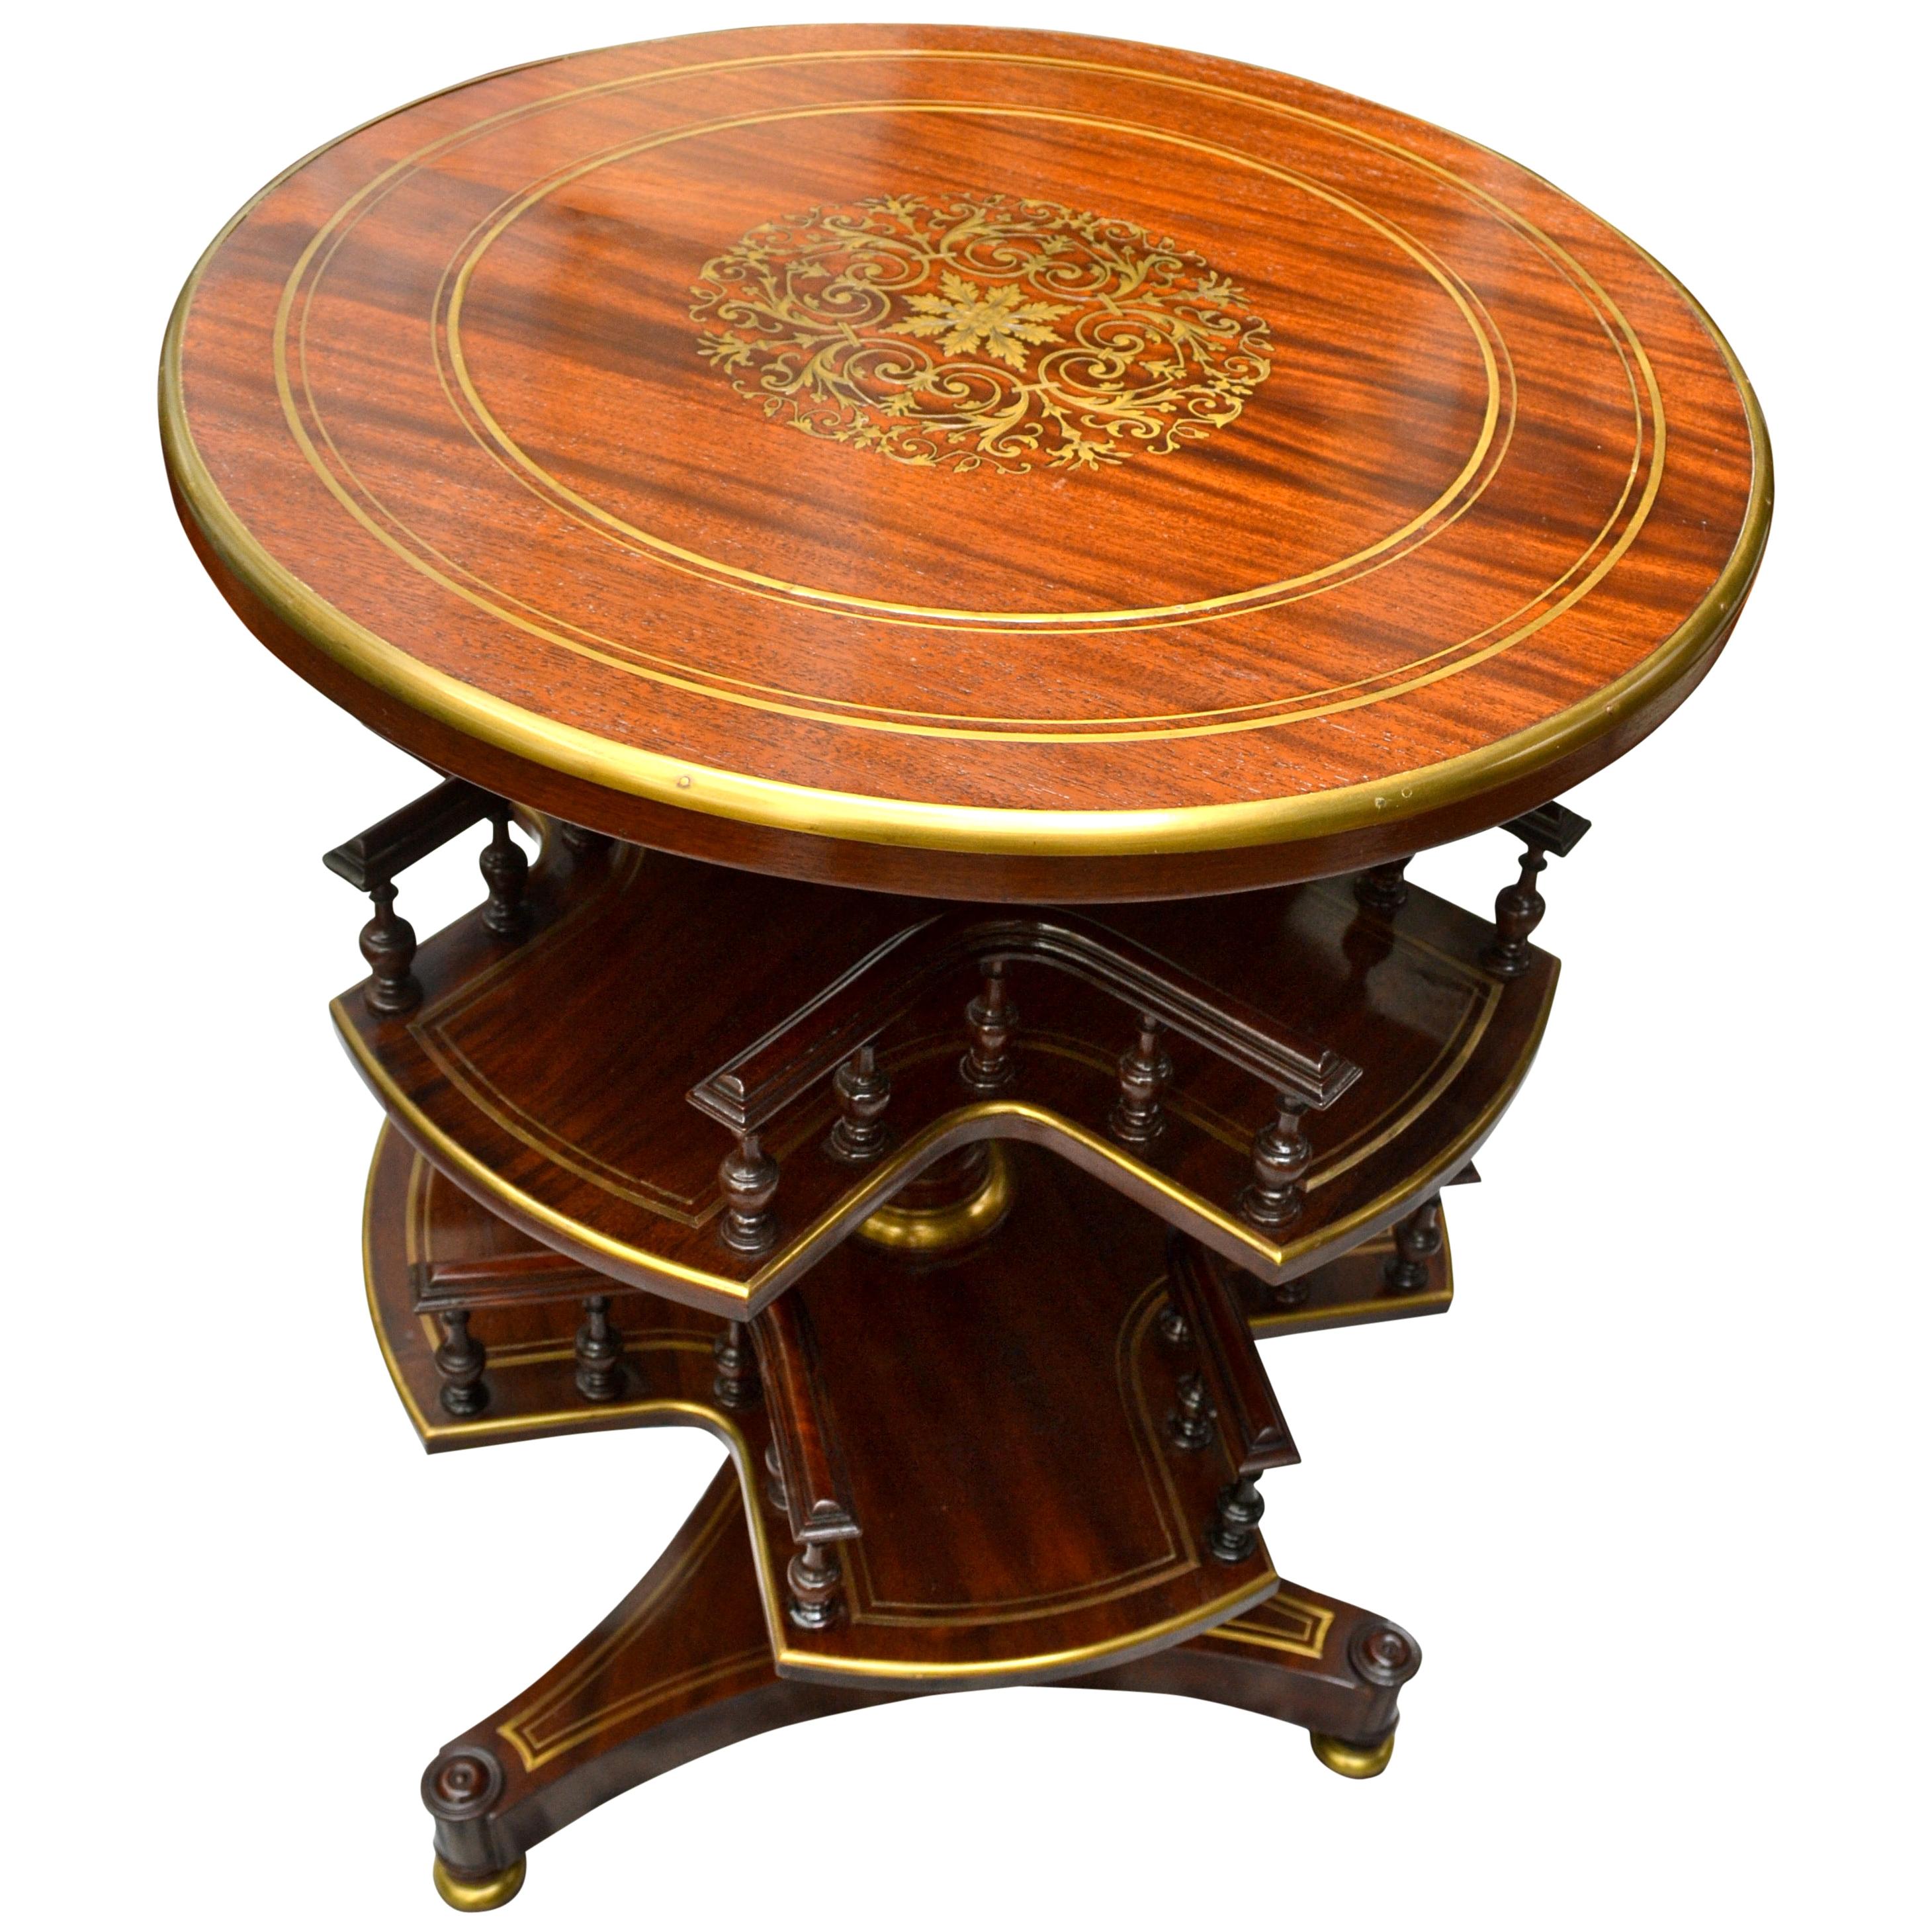 19th Century Regency Style English Carousel Table For Sale